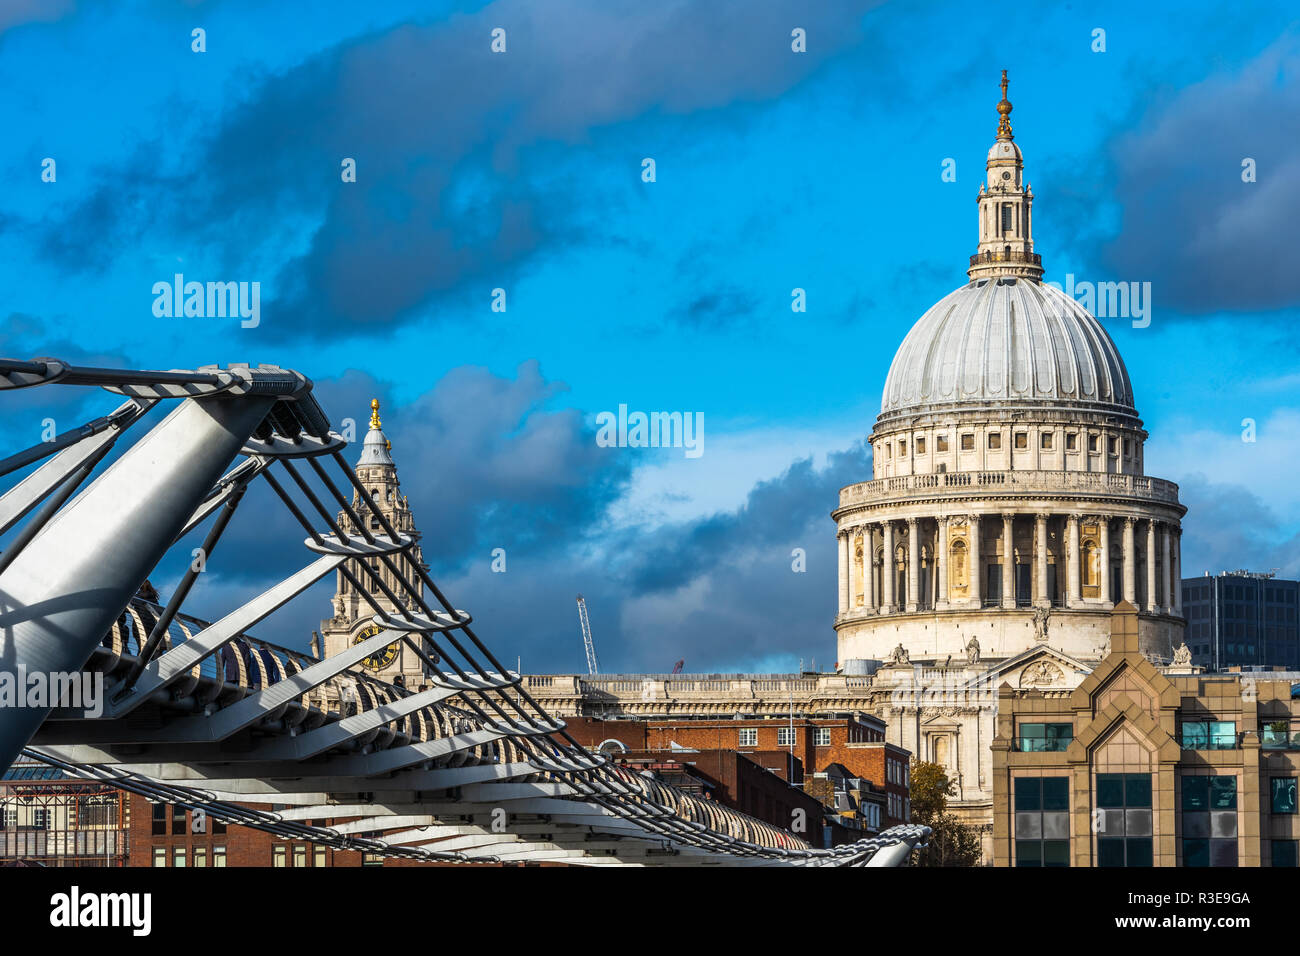 Scenic view of St Paul's cathedral with Millennium Bridge in foreground, London, UK Stock Photo